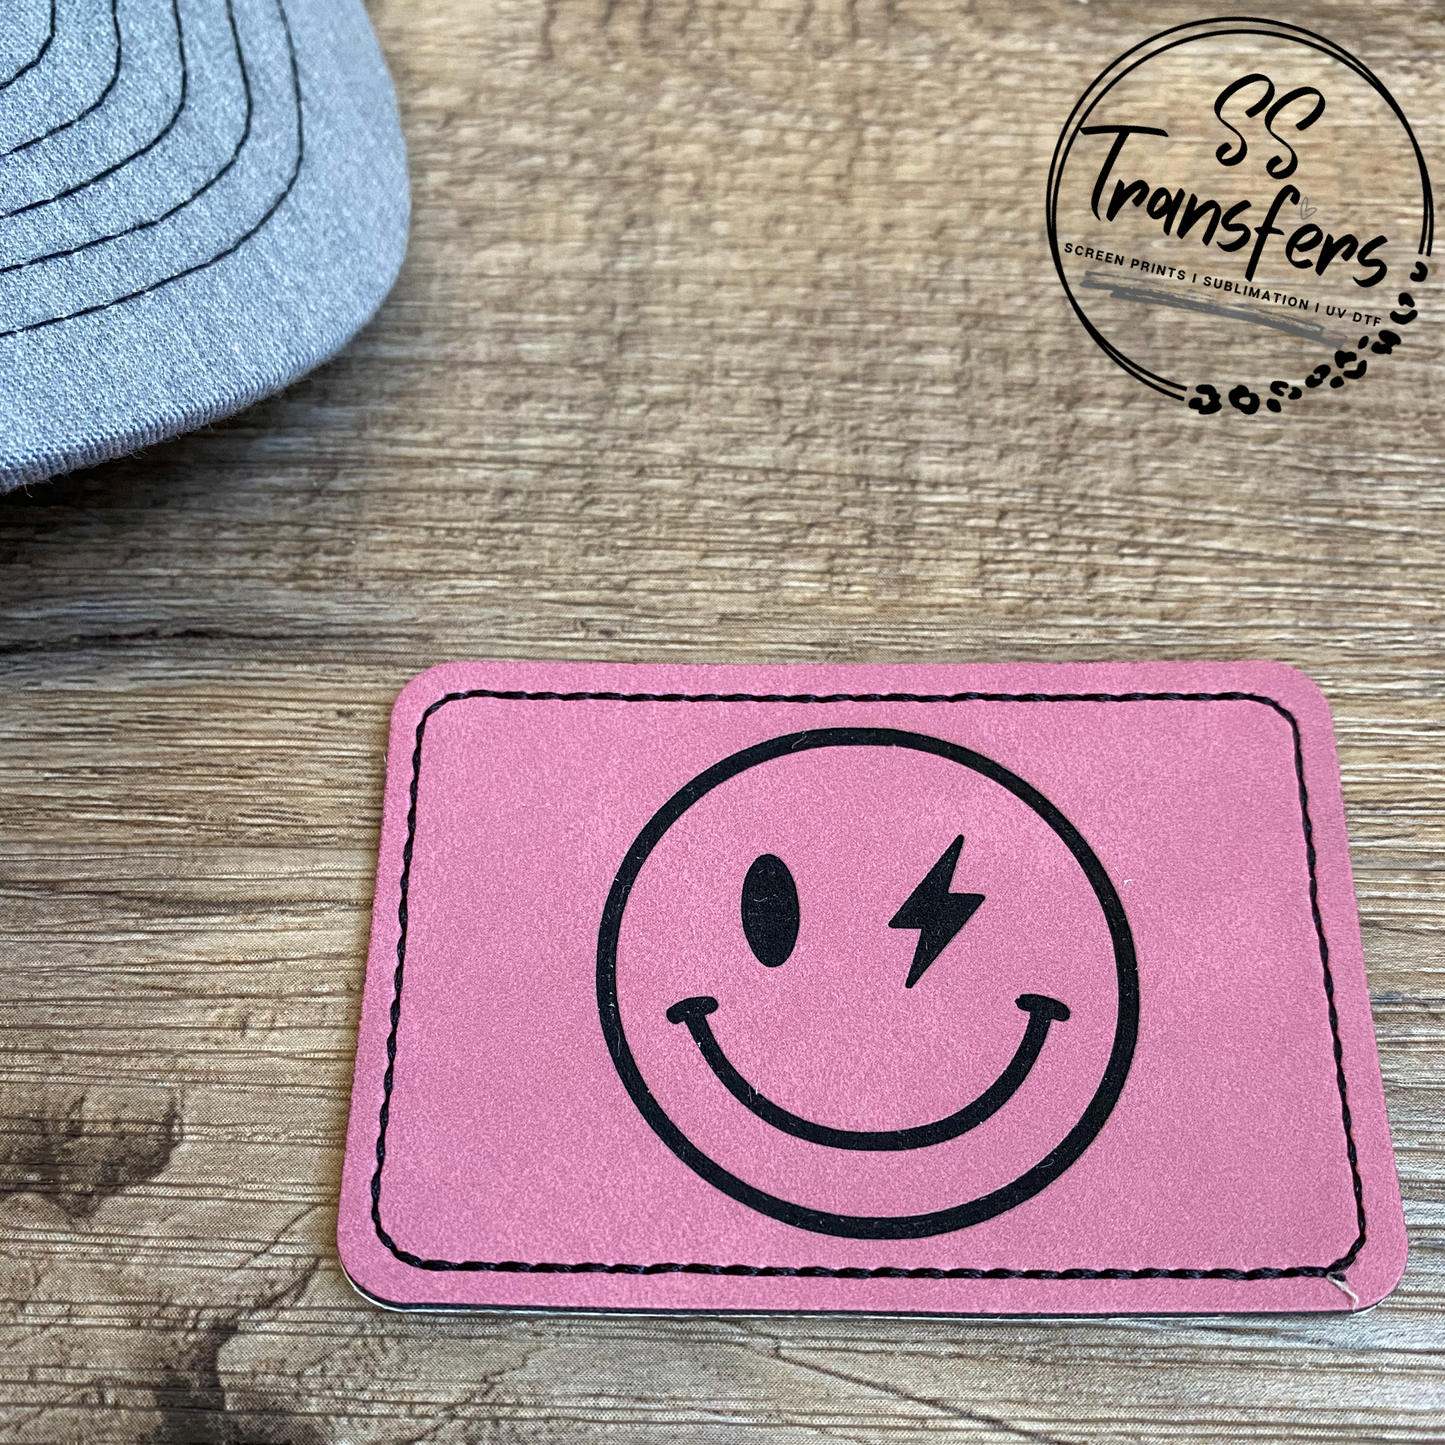 Smiley Lightening Bolt Leather Patch